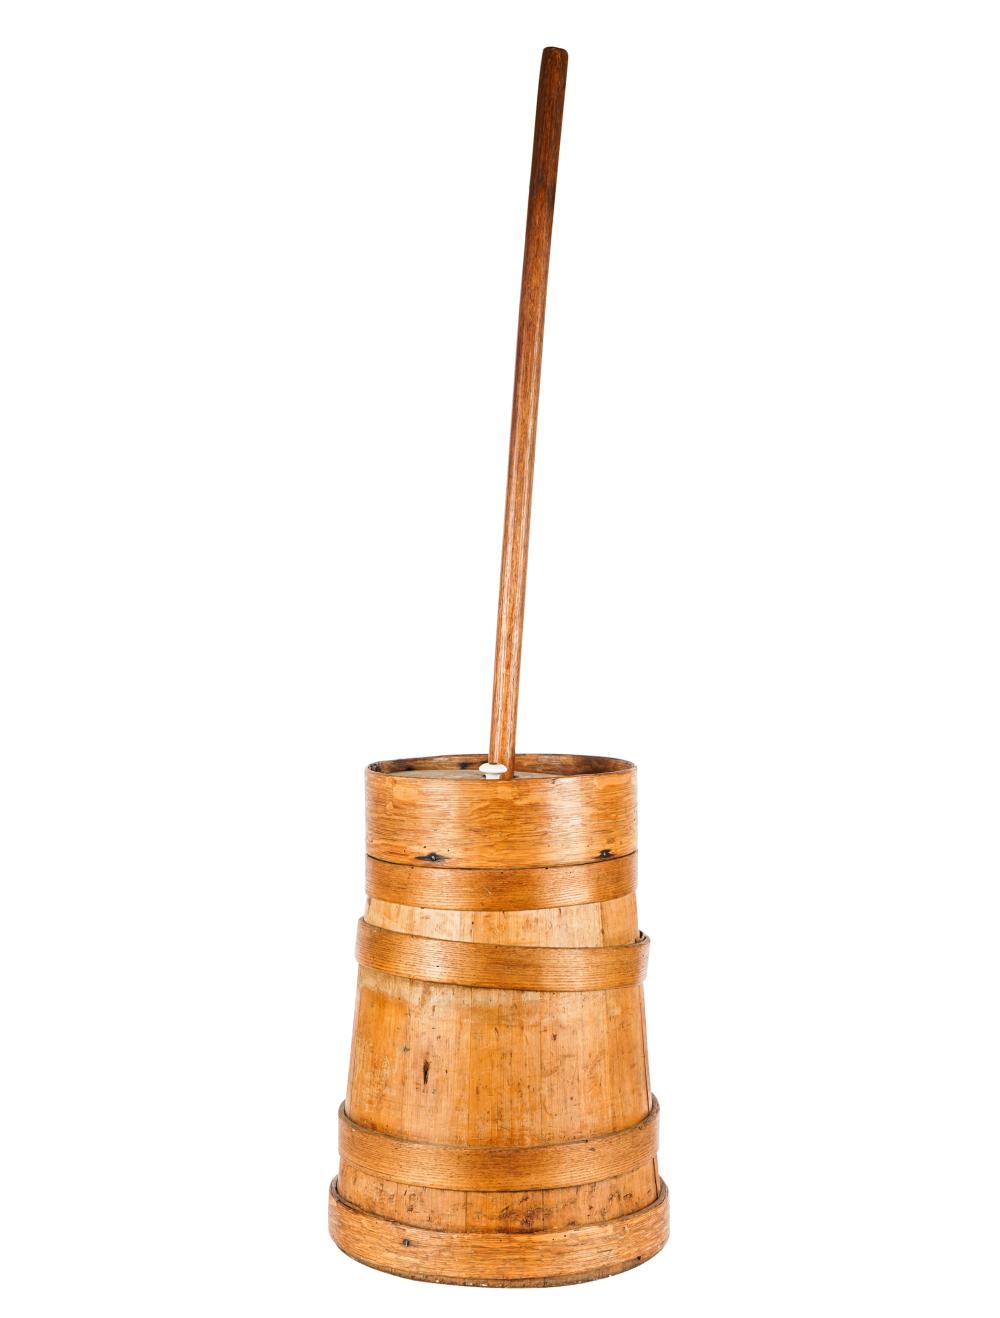 WOODEN BUTTER CHURNthe cover with a